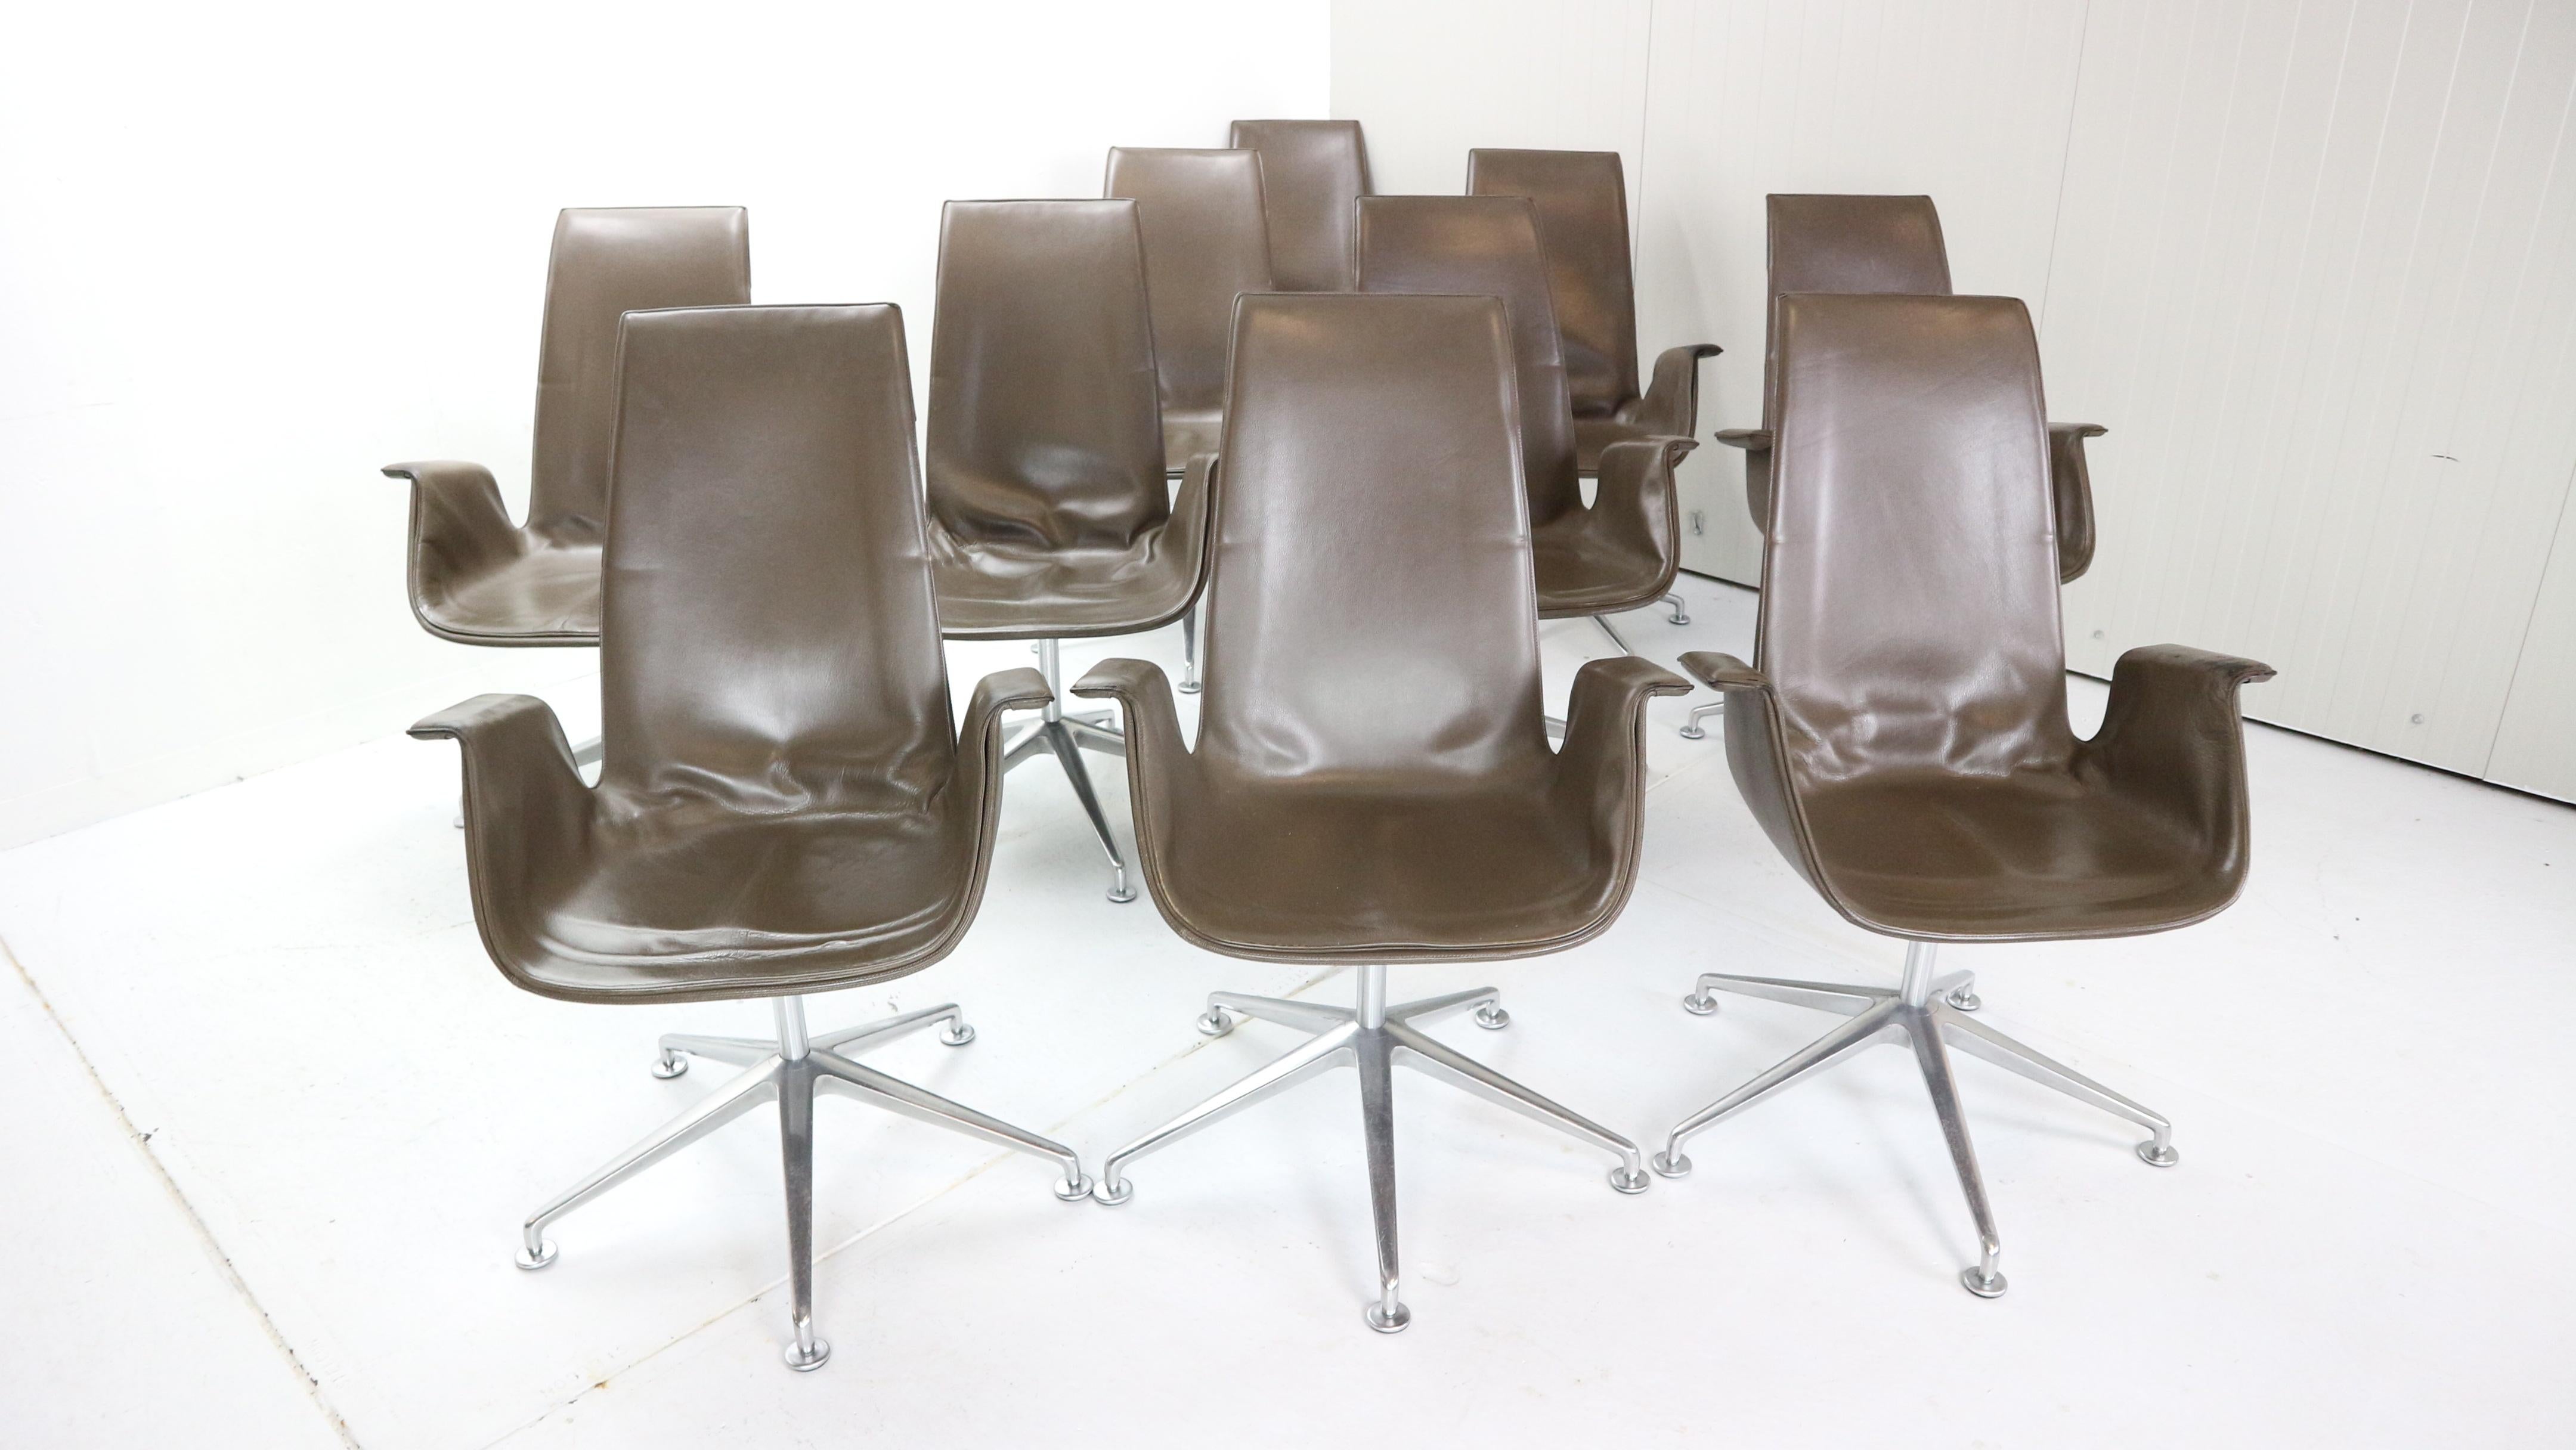 A set of 11 armchairs- office chairs designed by Preben Fabricius & Jørgen Kastholm for Walter Knool International manufacture in 1960s period, Denmark.
Model no: FK6725 as well as mostly called 